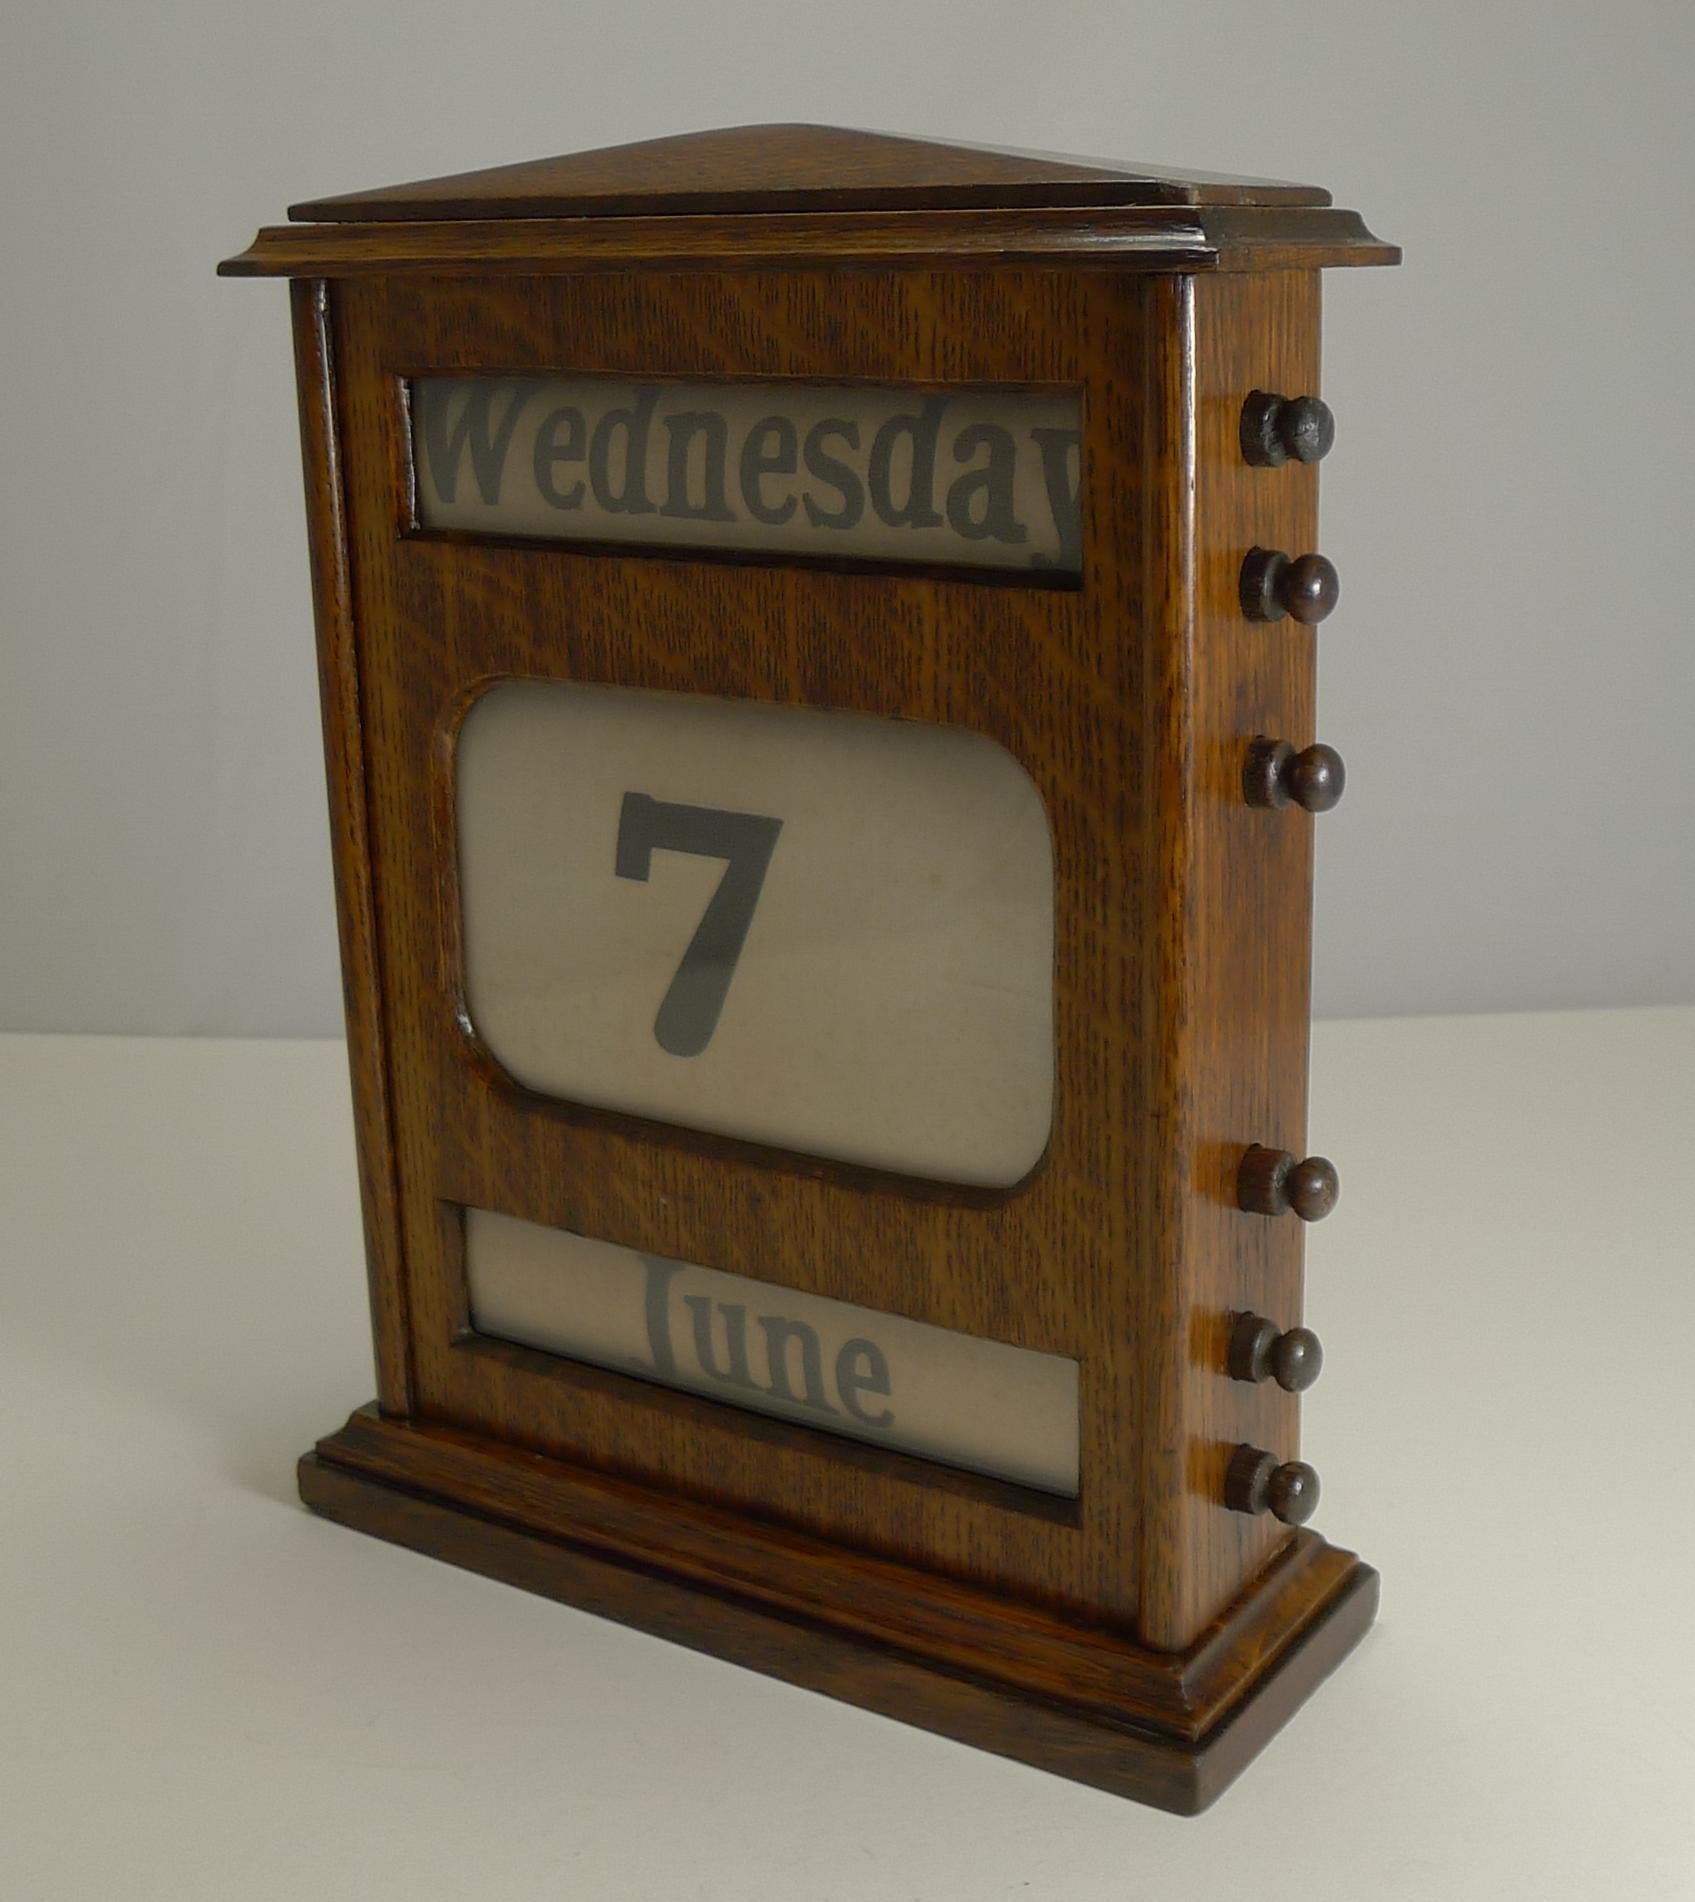 A good large Edwardian perpetual calendar made from solid English oak. The keys either side are used to forward and return the rollers inside, changing the day, date and month.

Dating to circa 1900, it remains in excellent condition, normal marks